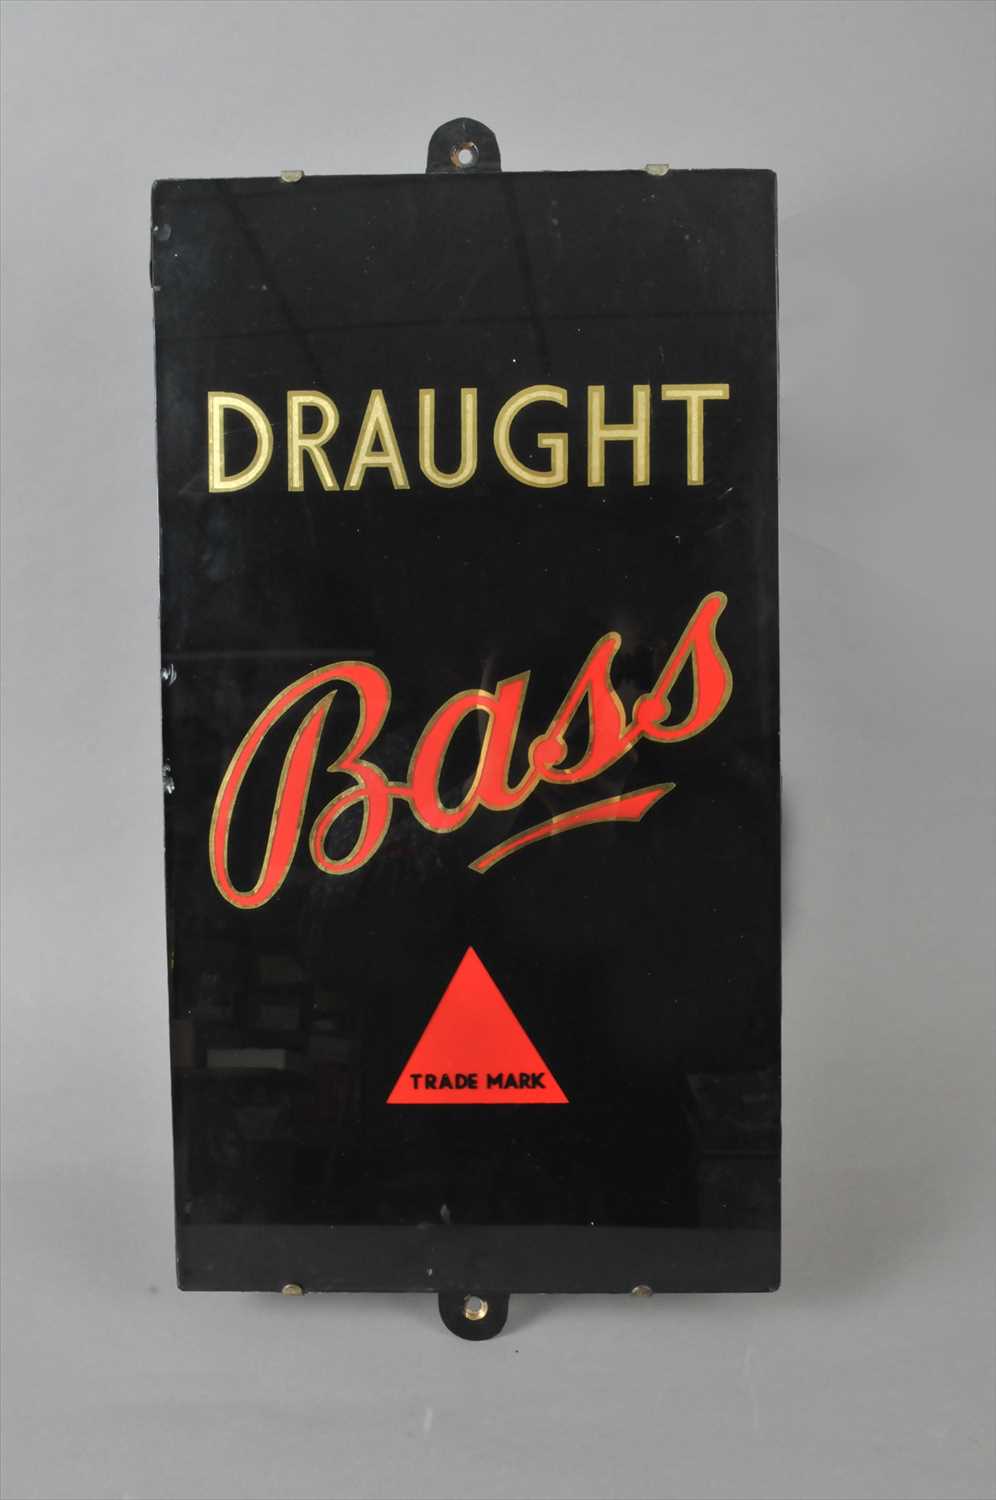 An original slate-backed pub sign advertising Draught Bass